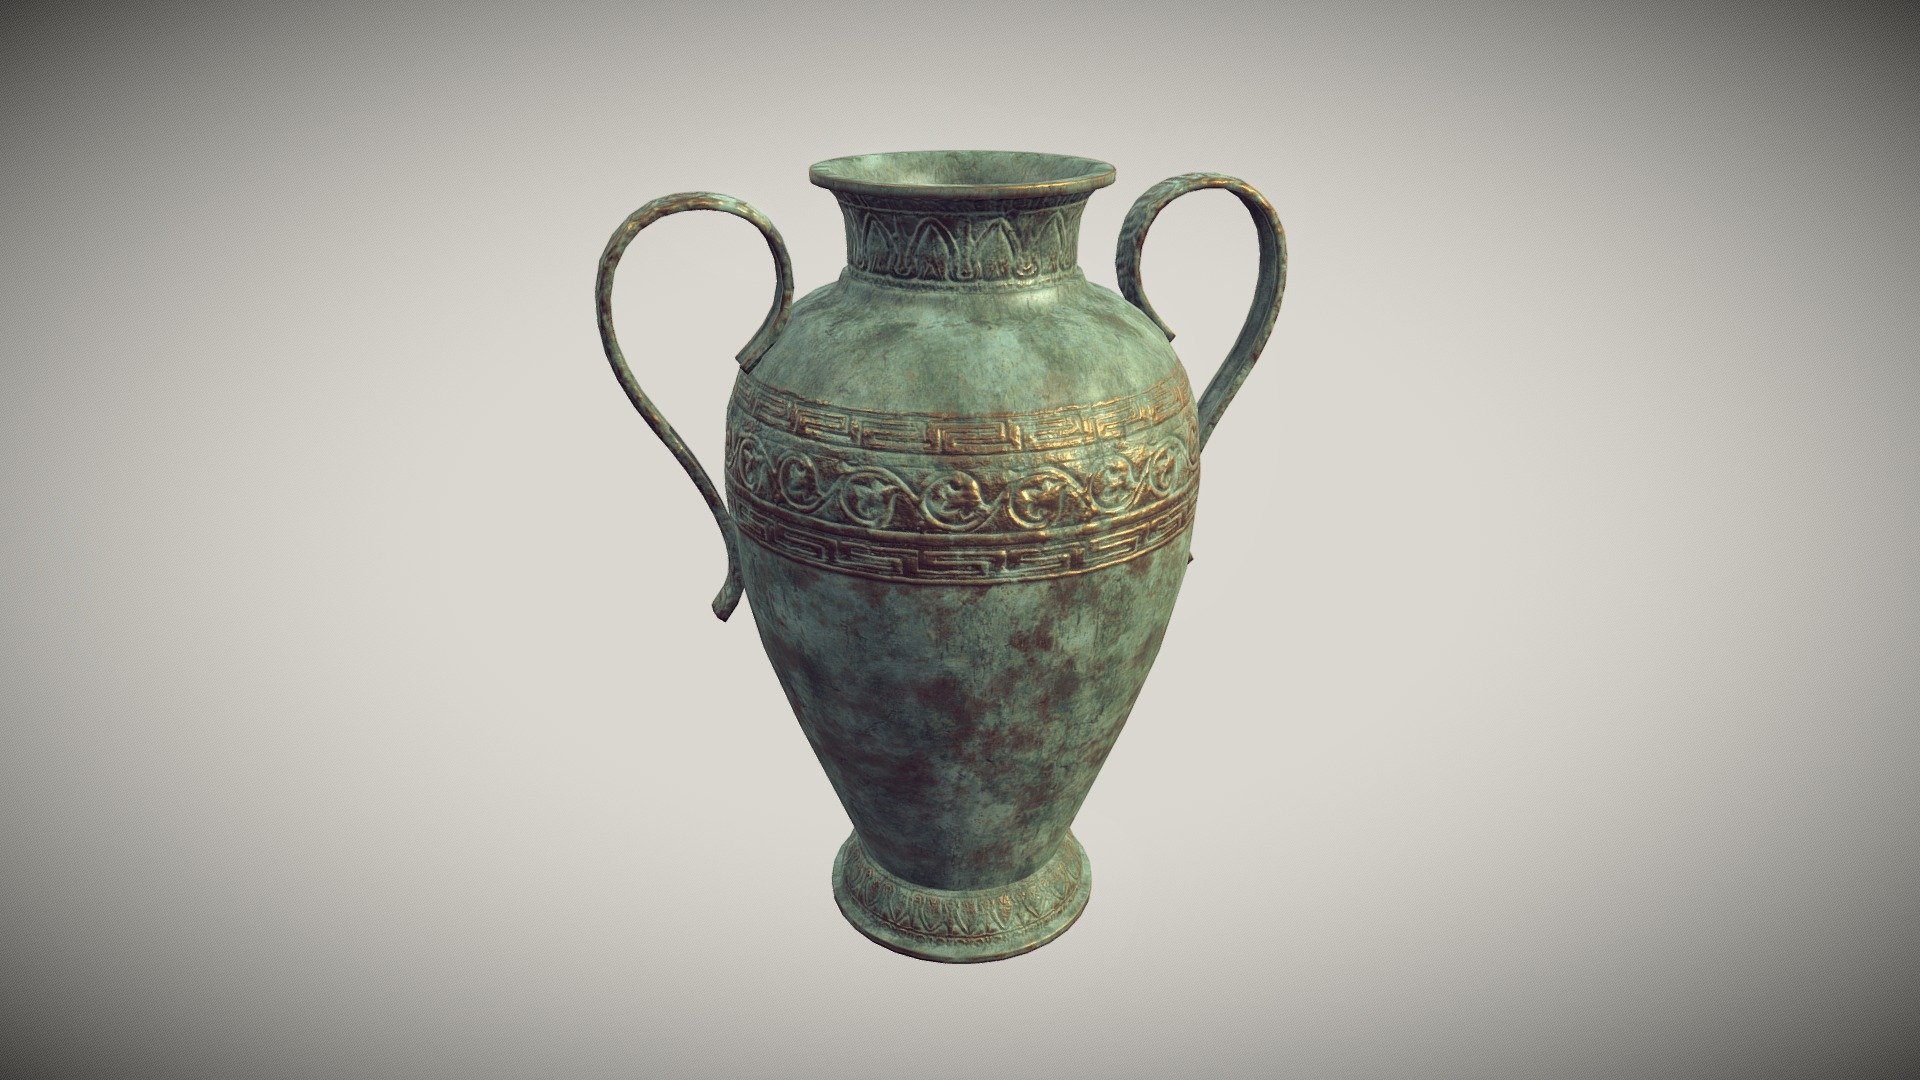 Antique ornate bronze vase covered in patina.

Low-poly, PBR. Includes High-poly files.

Collection of my other historical models:
https://sketchfab.com/avatrass/collections/historical-item-models - Antique Bronze Vase - Buy Royalty Free 3D model by avatrass 3d model